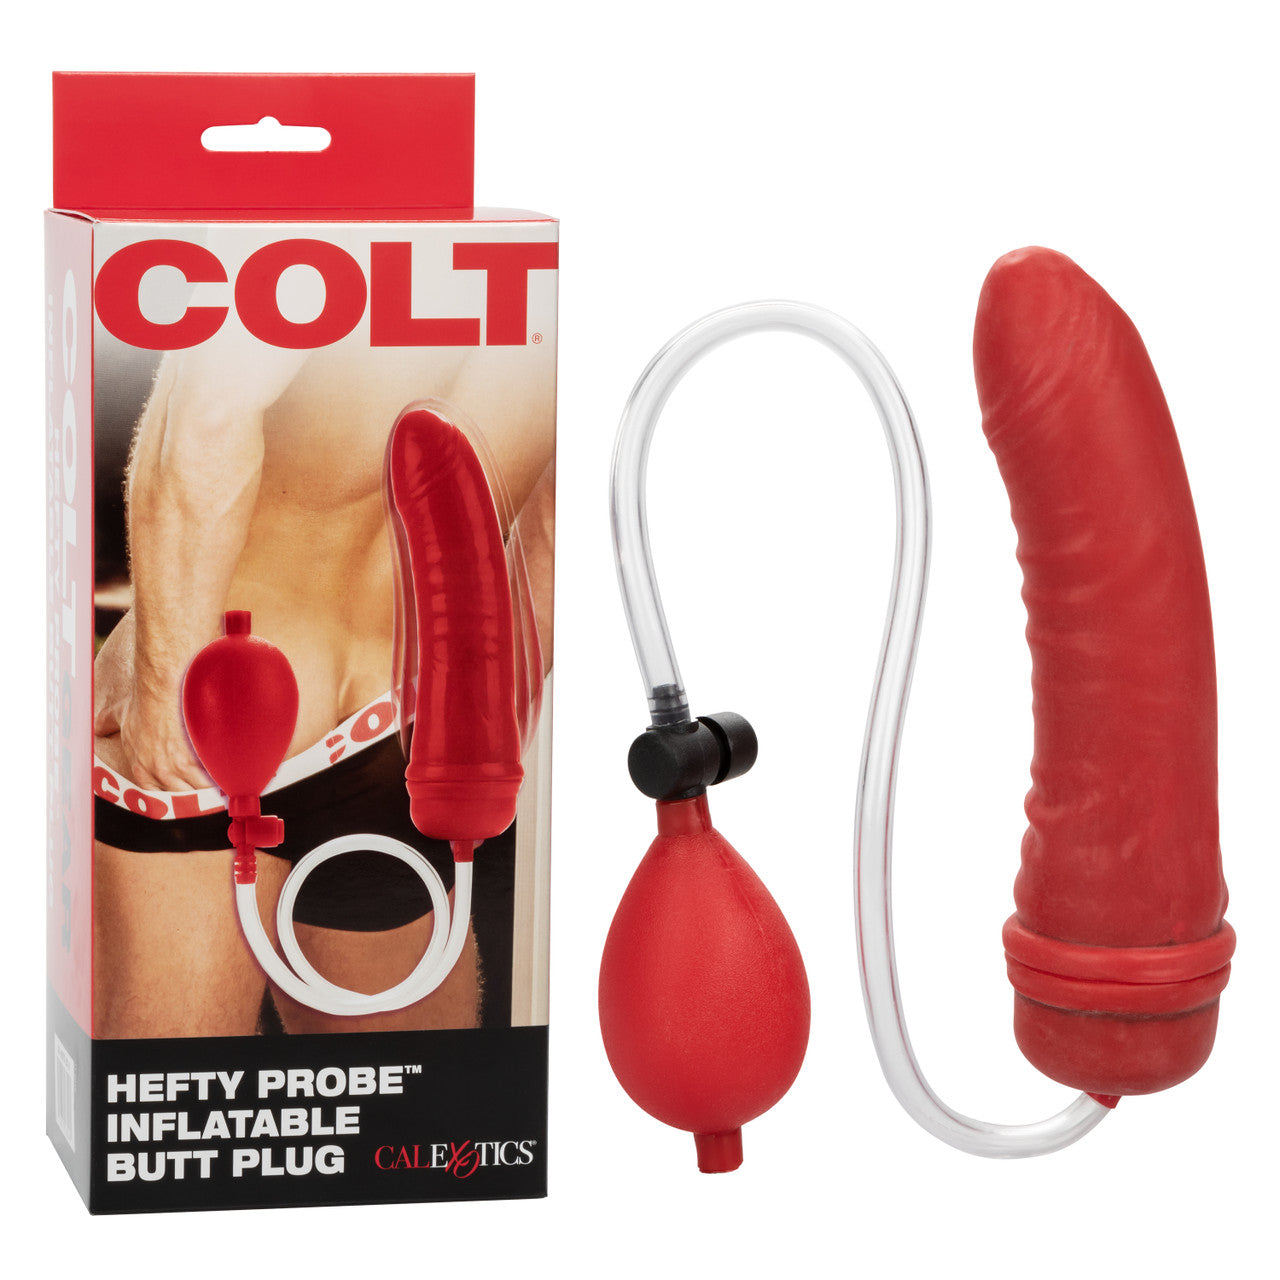 Colt Hefty Probe Inflatable Butt Plug - Red - Thorn & Feather Sex Toy Canada